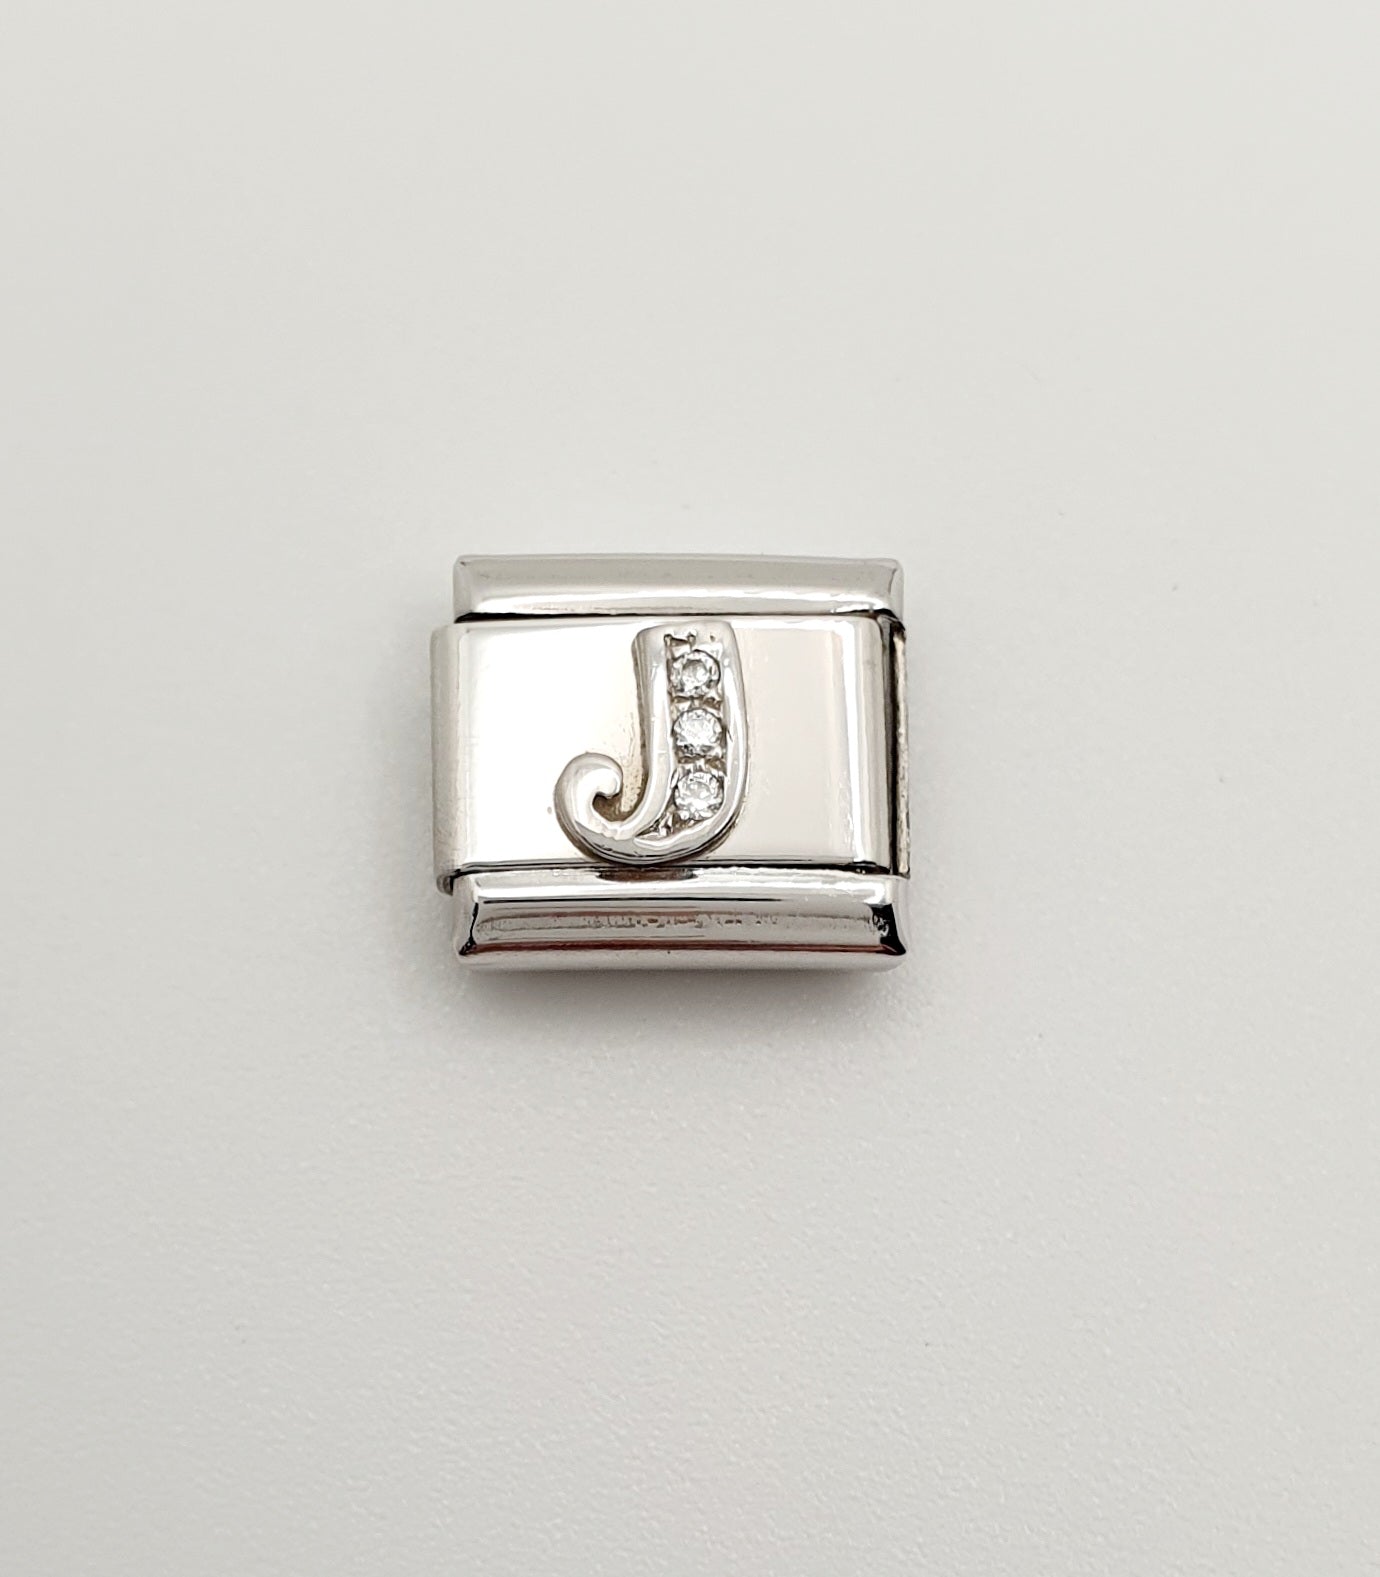 Nomination Charm Link "J" Stainless Steel with CZ's & 925 Silver, 330301 10